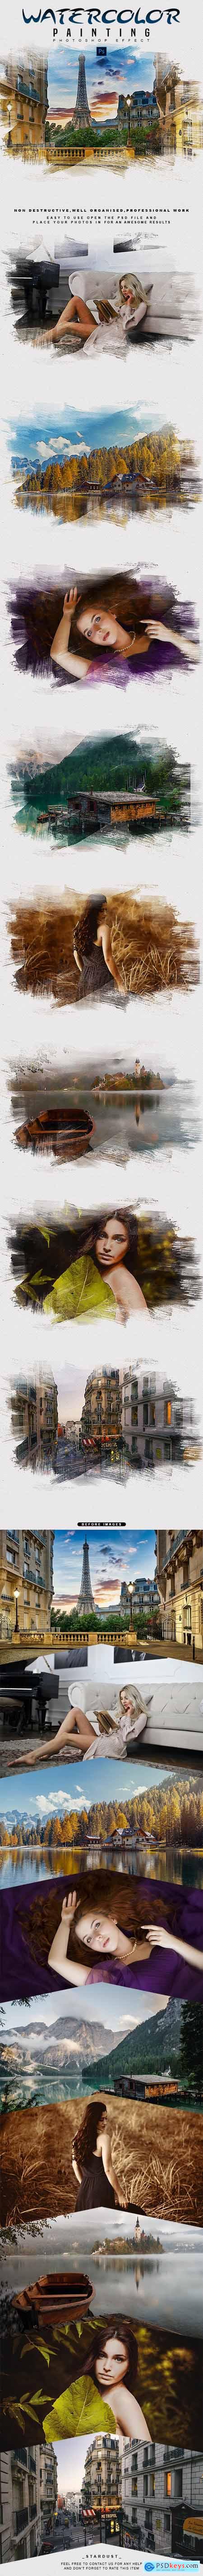 Watercolor Painting - Photoshop Effect 28936851